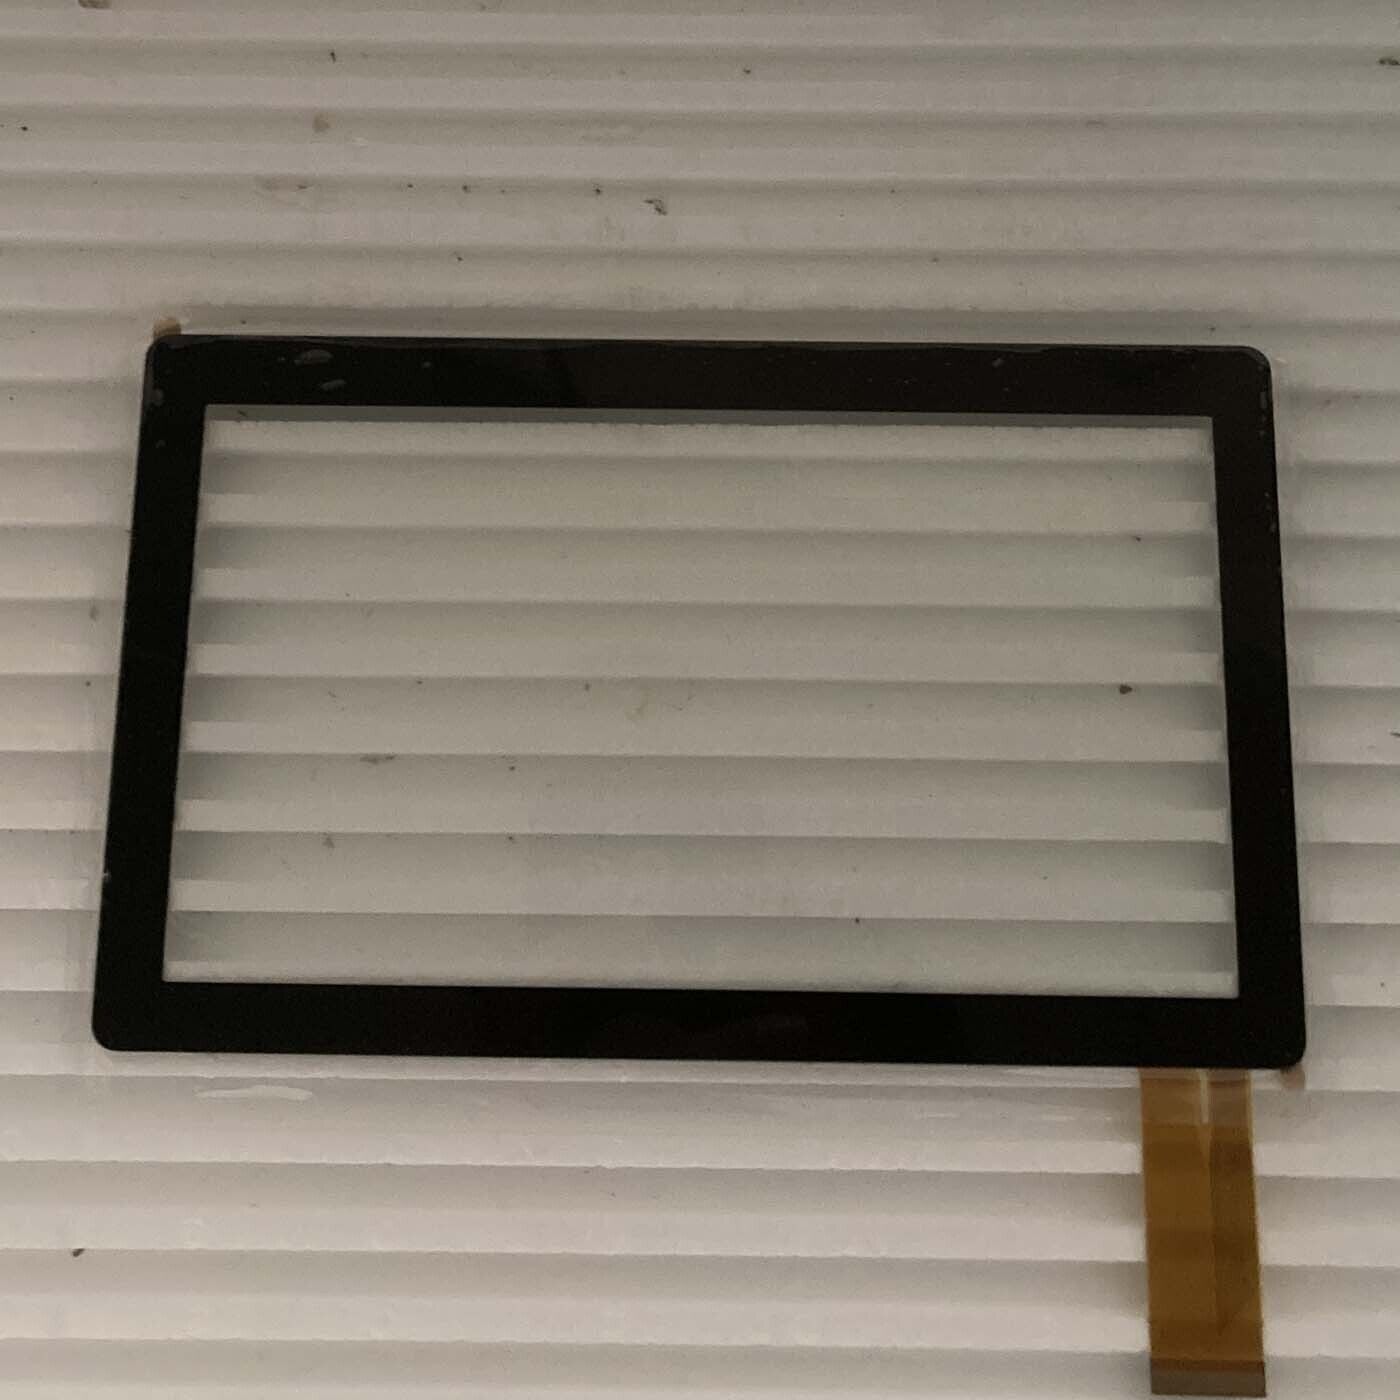 For PRITOM K7 Pro Kids Tablet New Touch Screen Digitizer